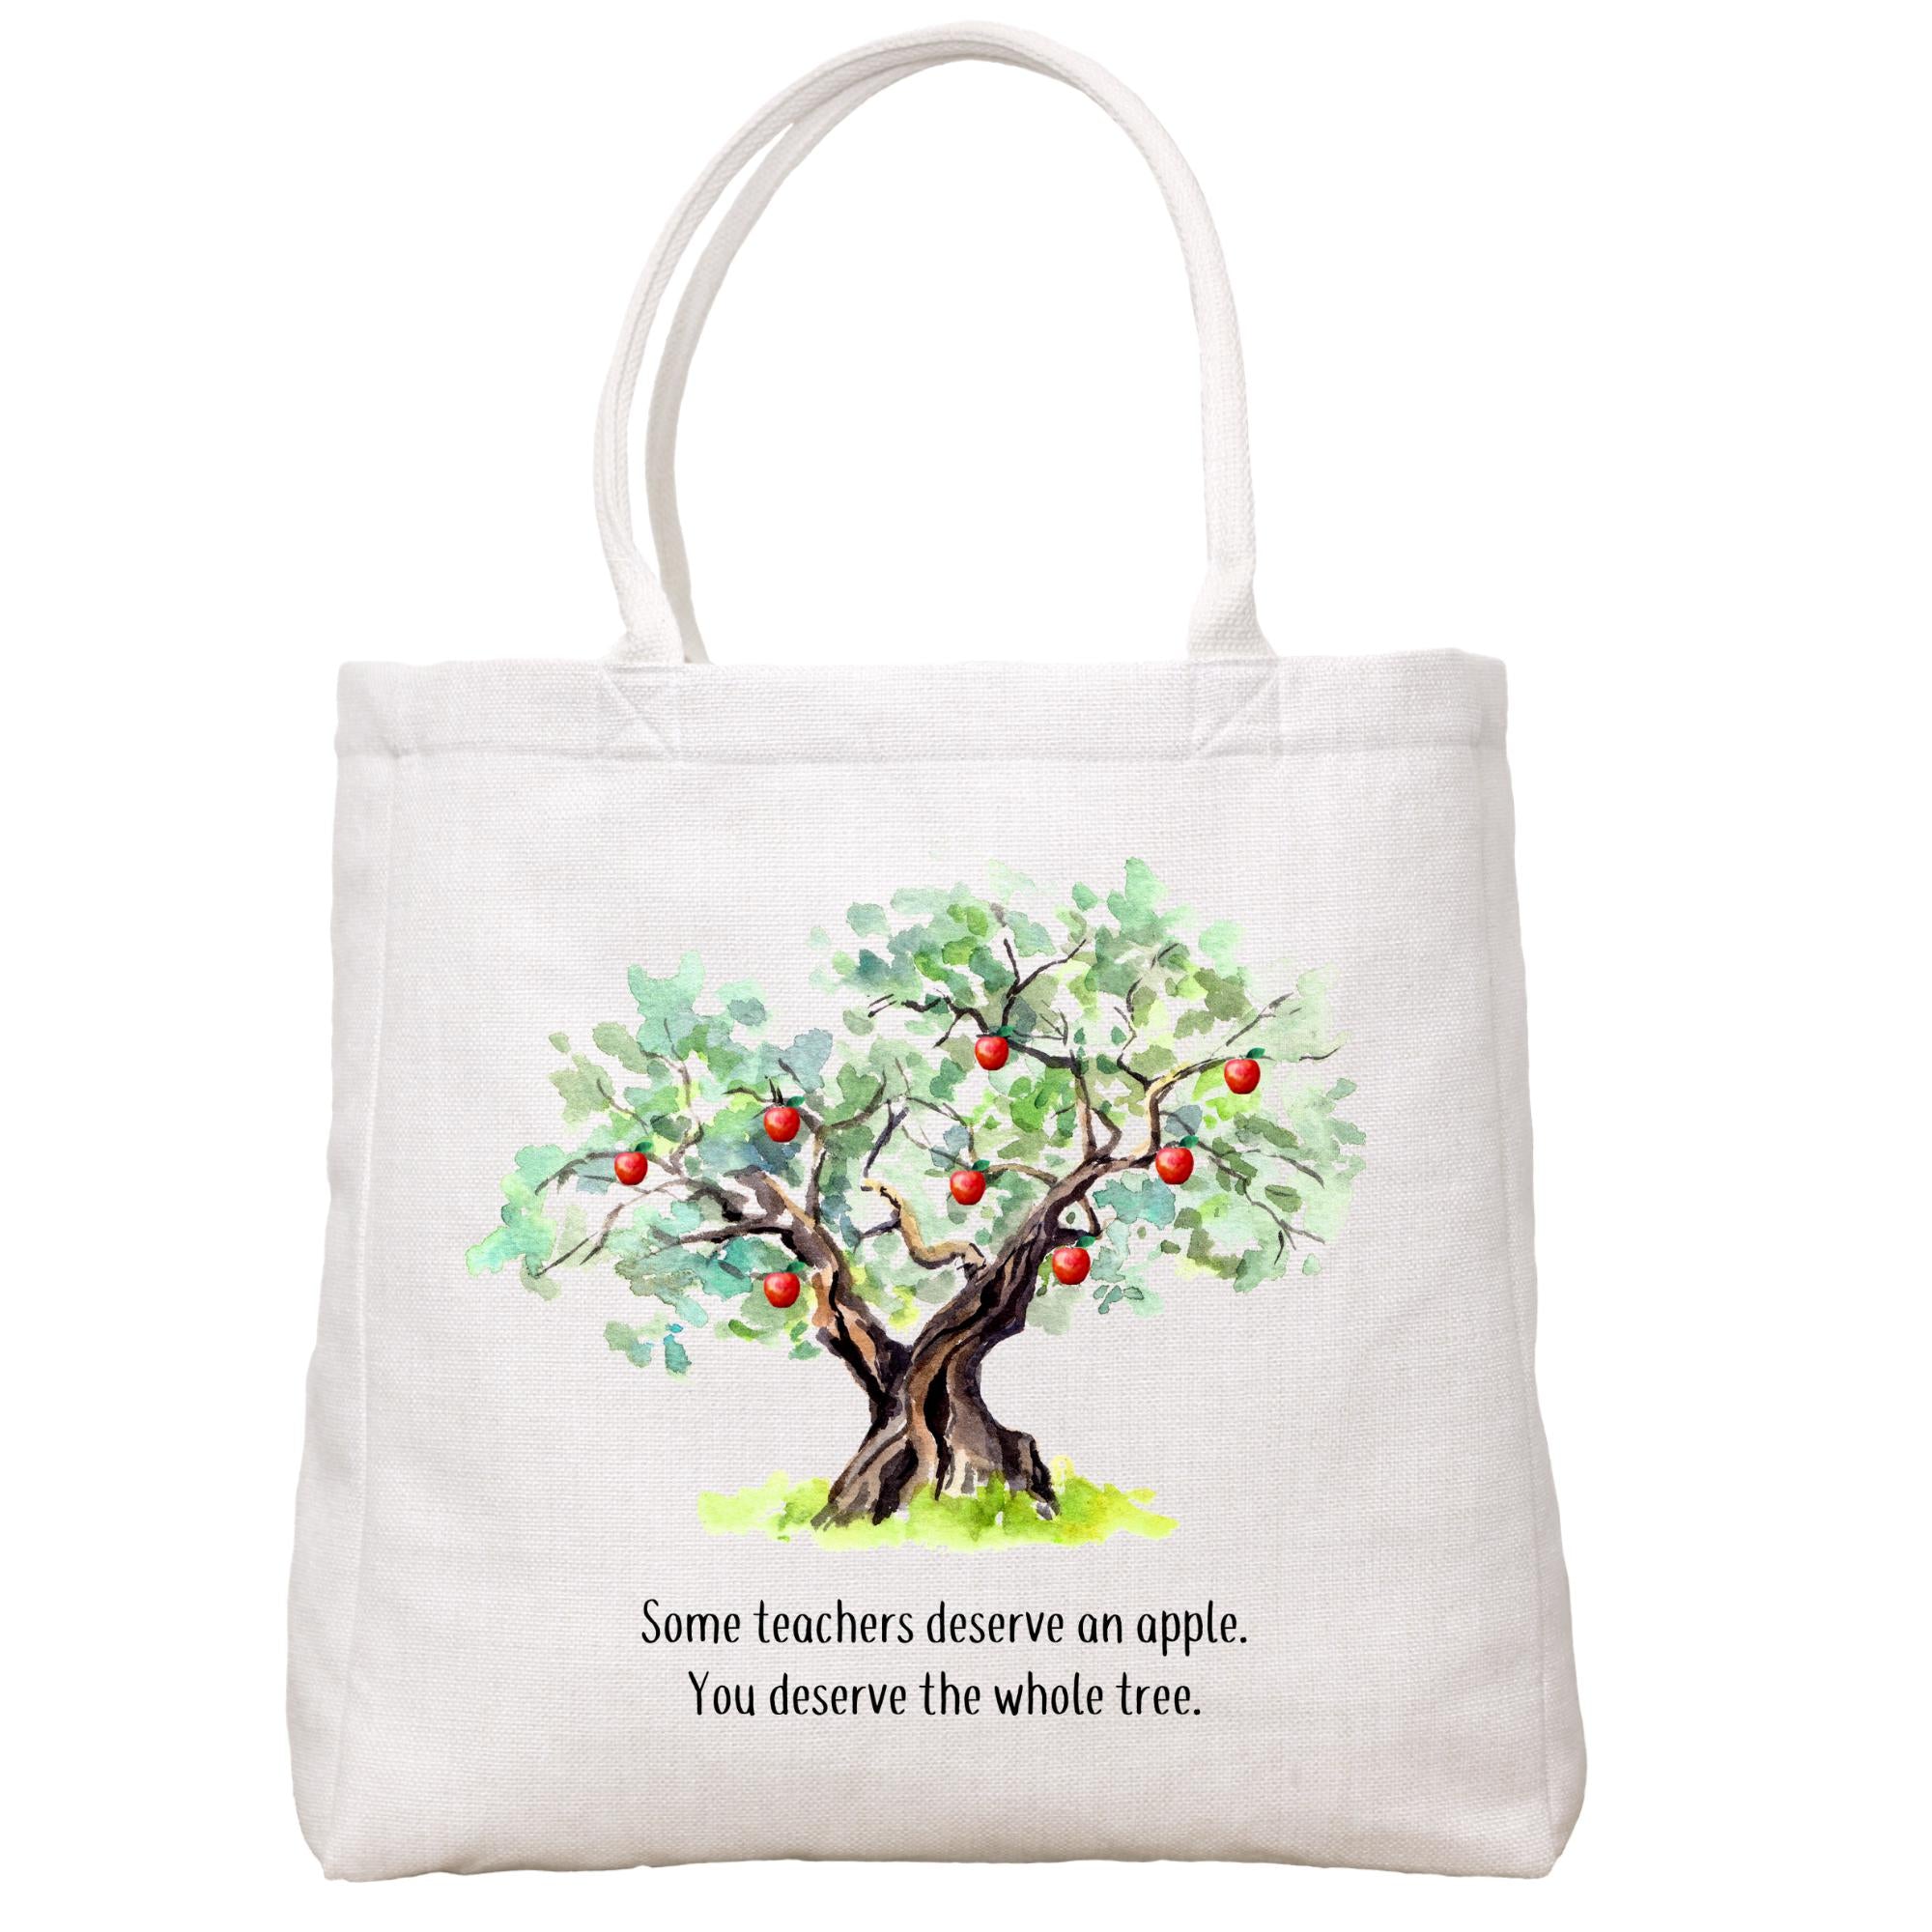 The Whole Tree Tote Bag Tote Bag - Southern Sisters